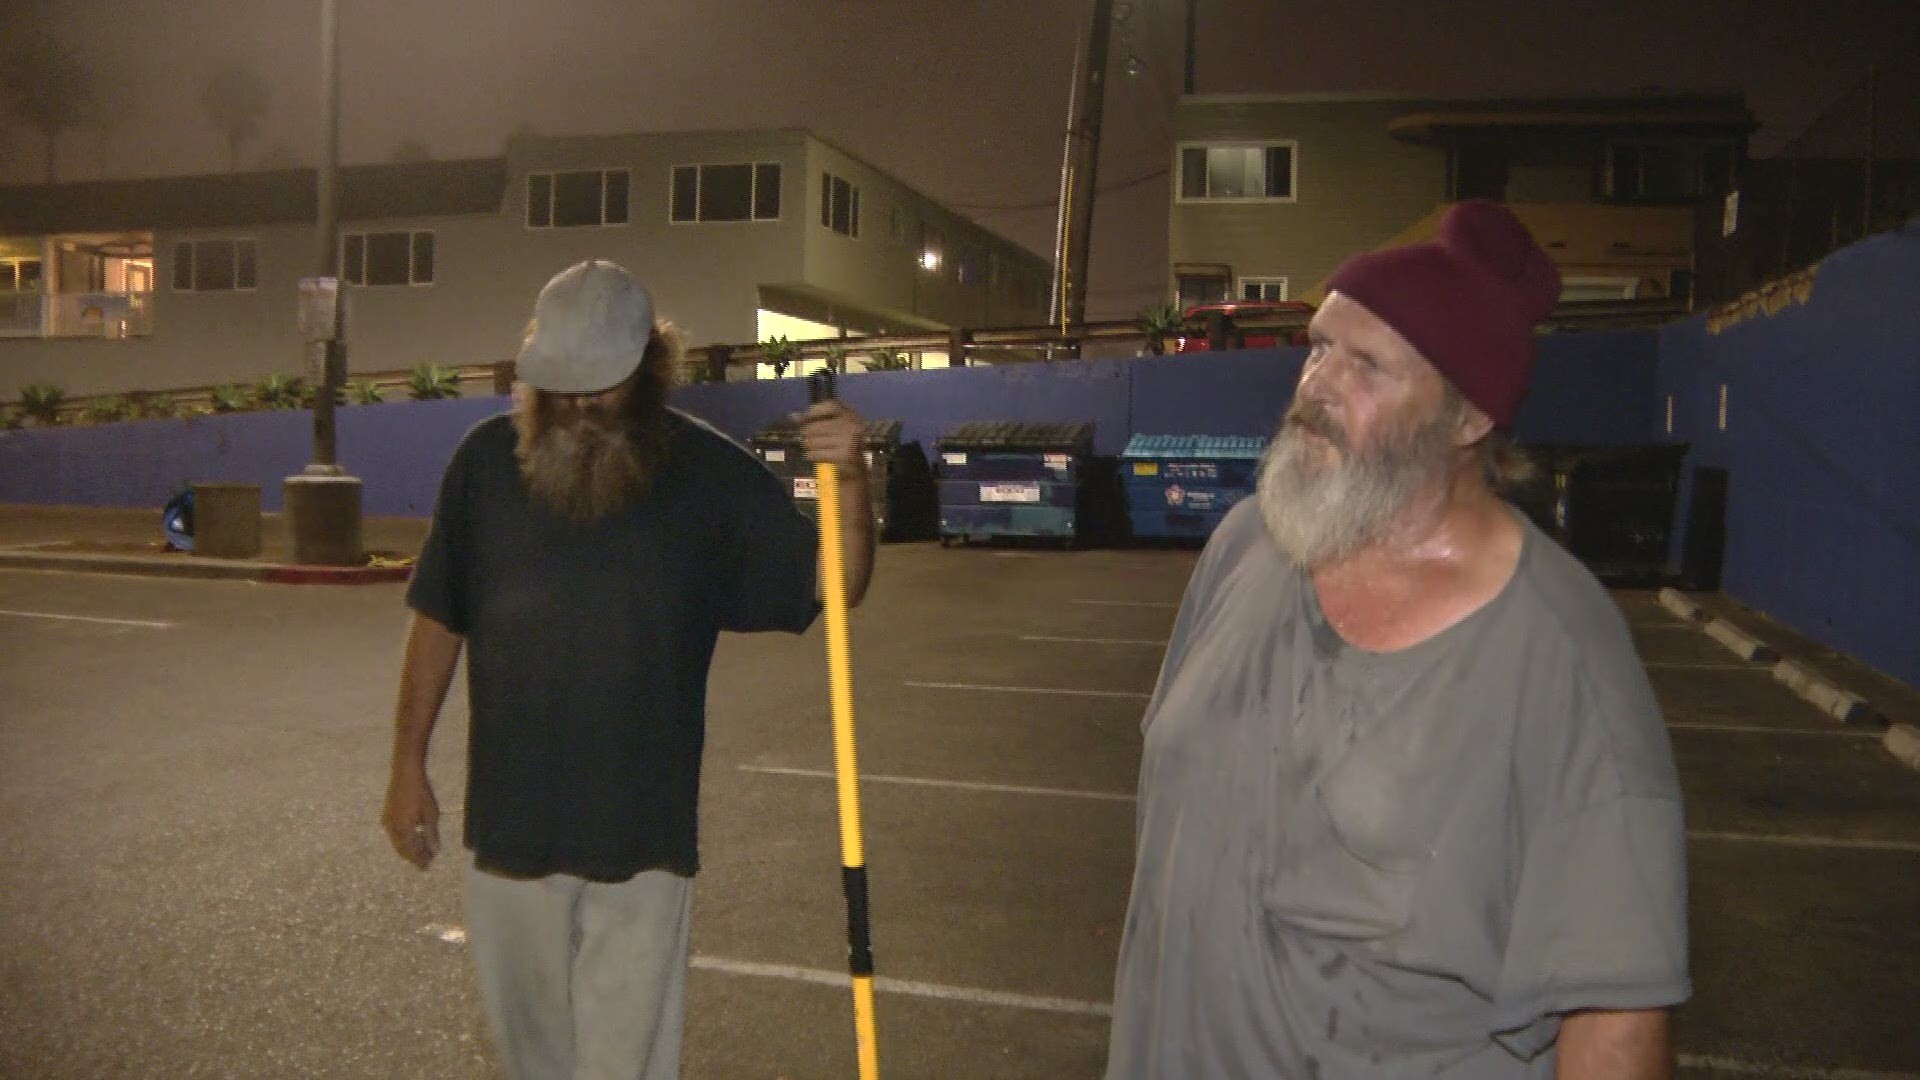 Two homeless men in Ocean Beach, San Diego want to thank viewers for changing their lives forever.